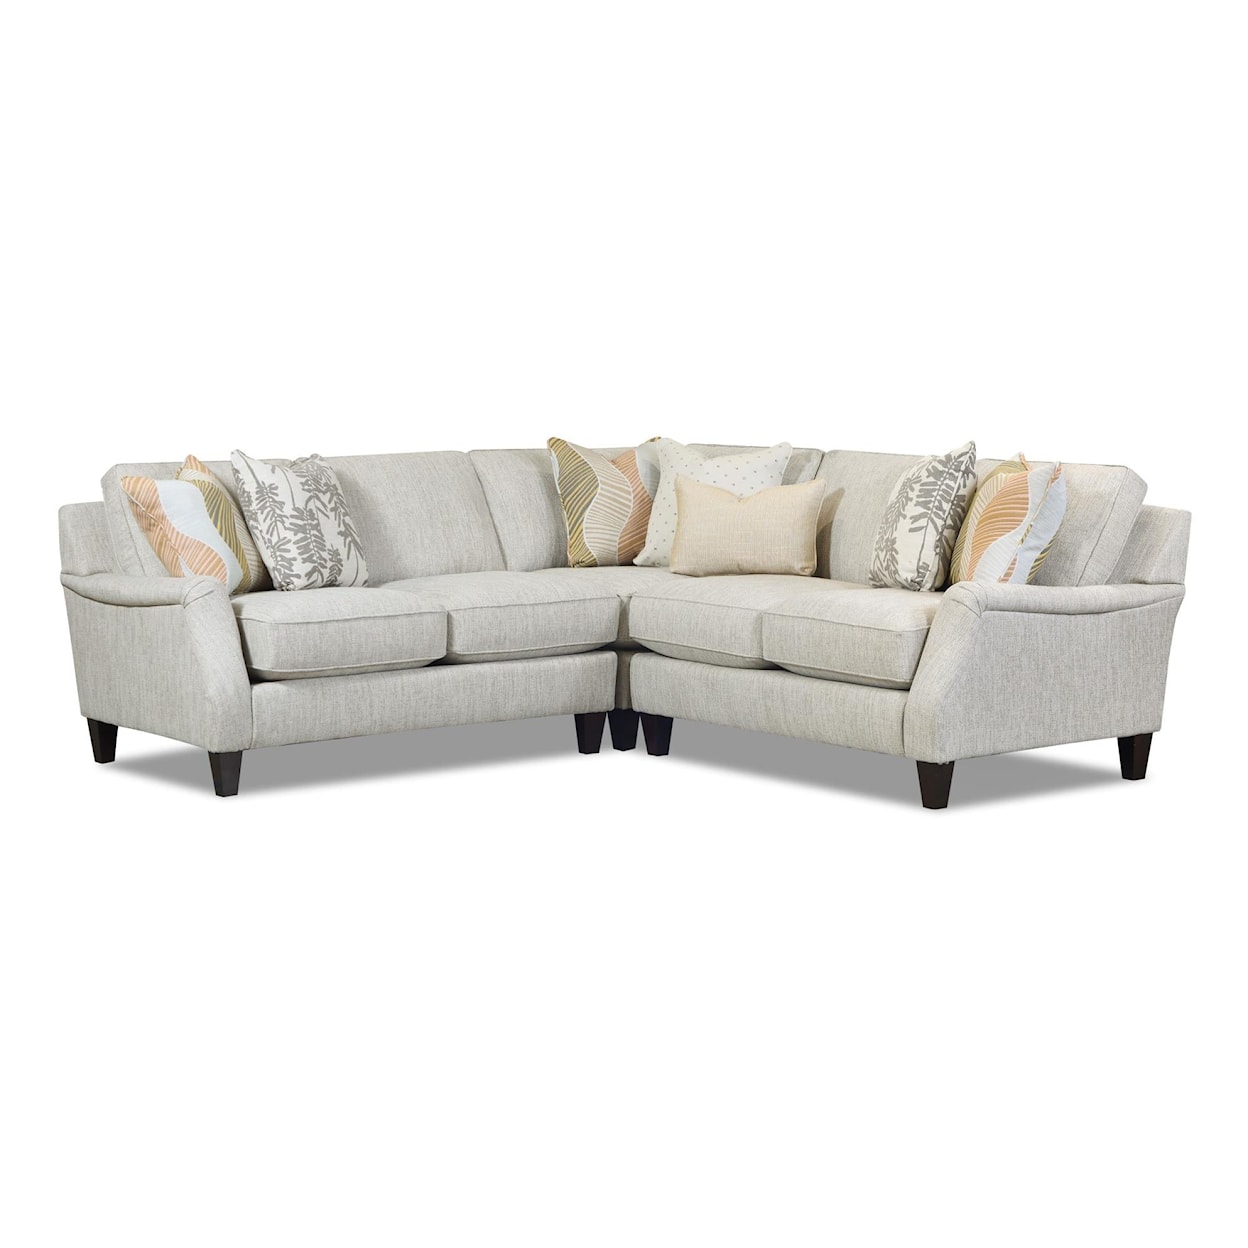 VFM Signature 7002 LOXLEY COCONUT Sectional